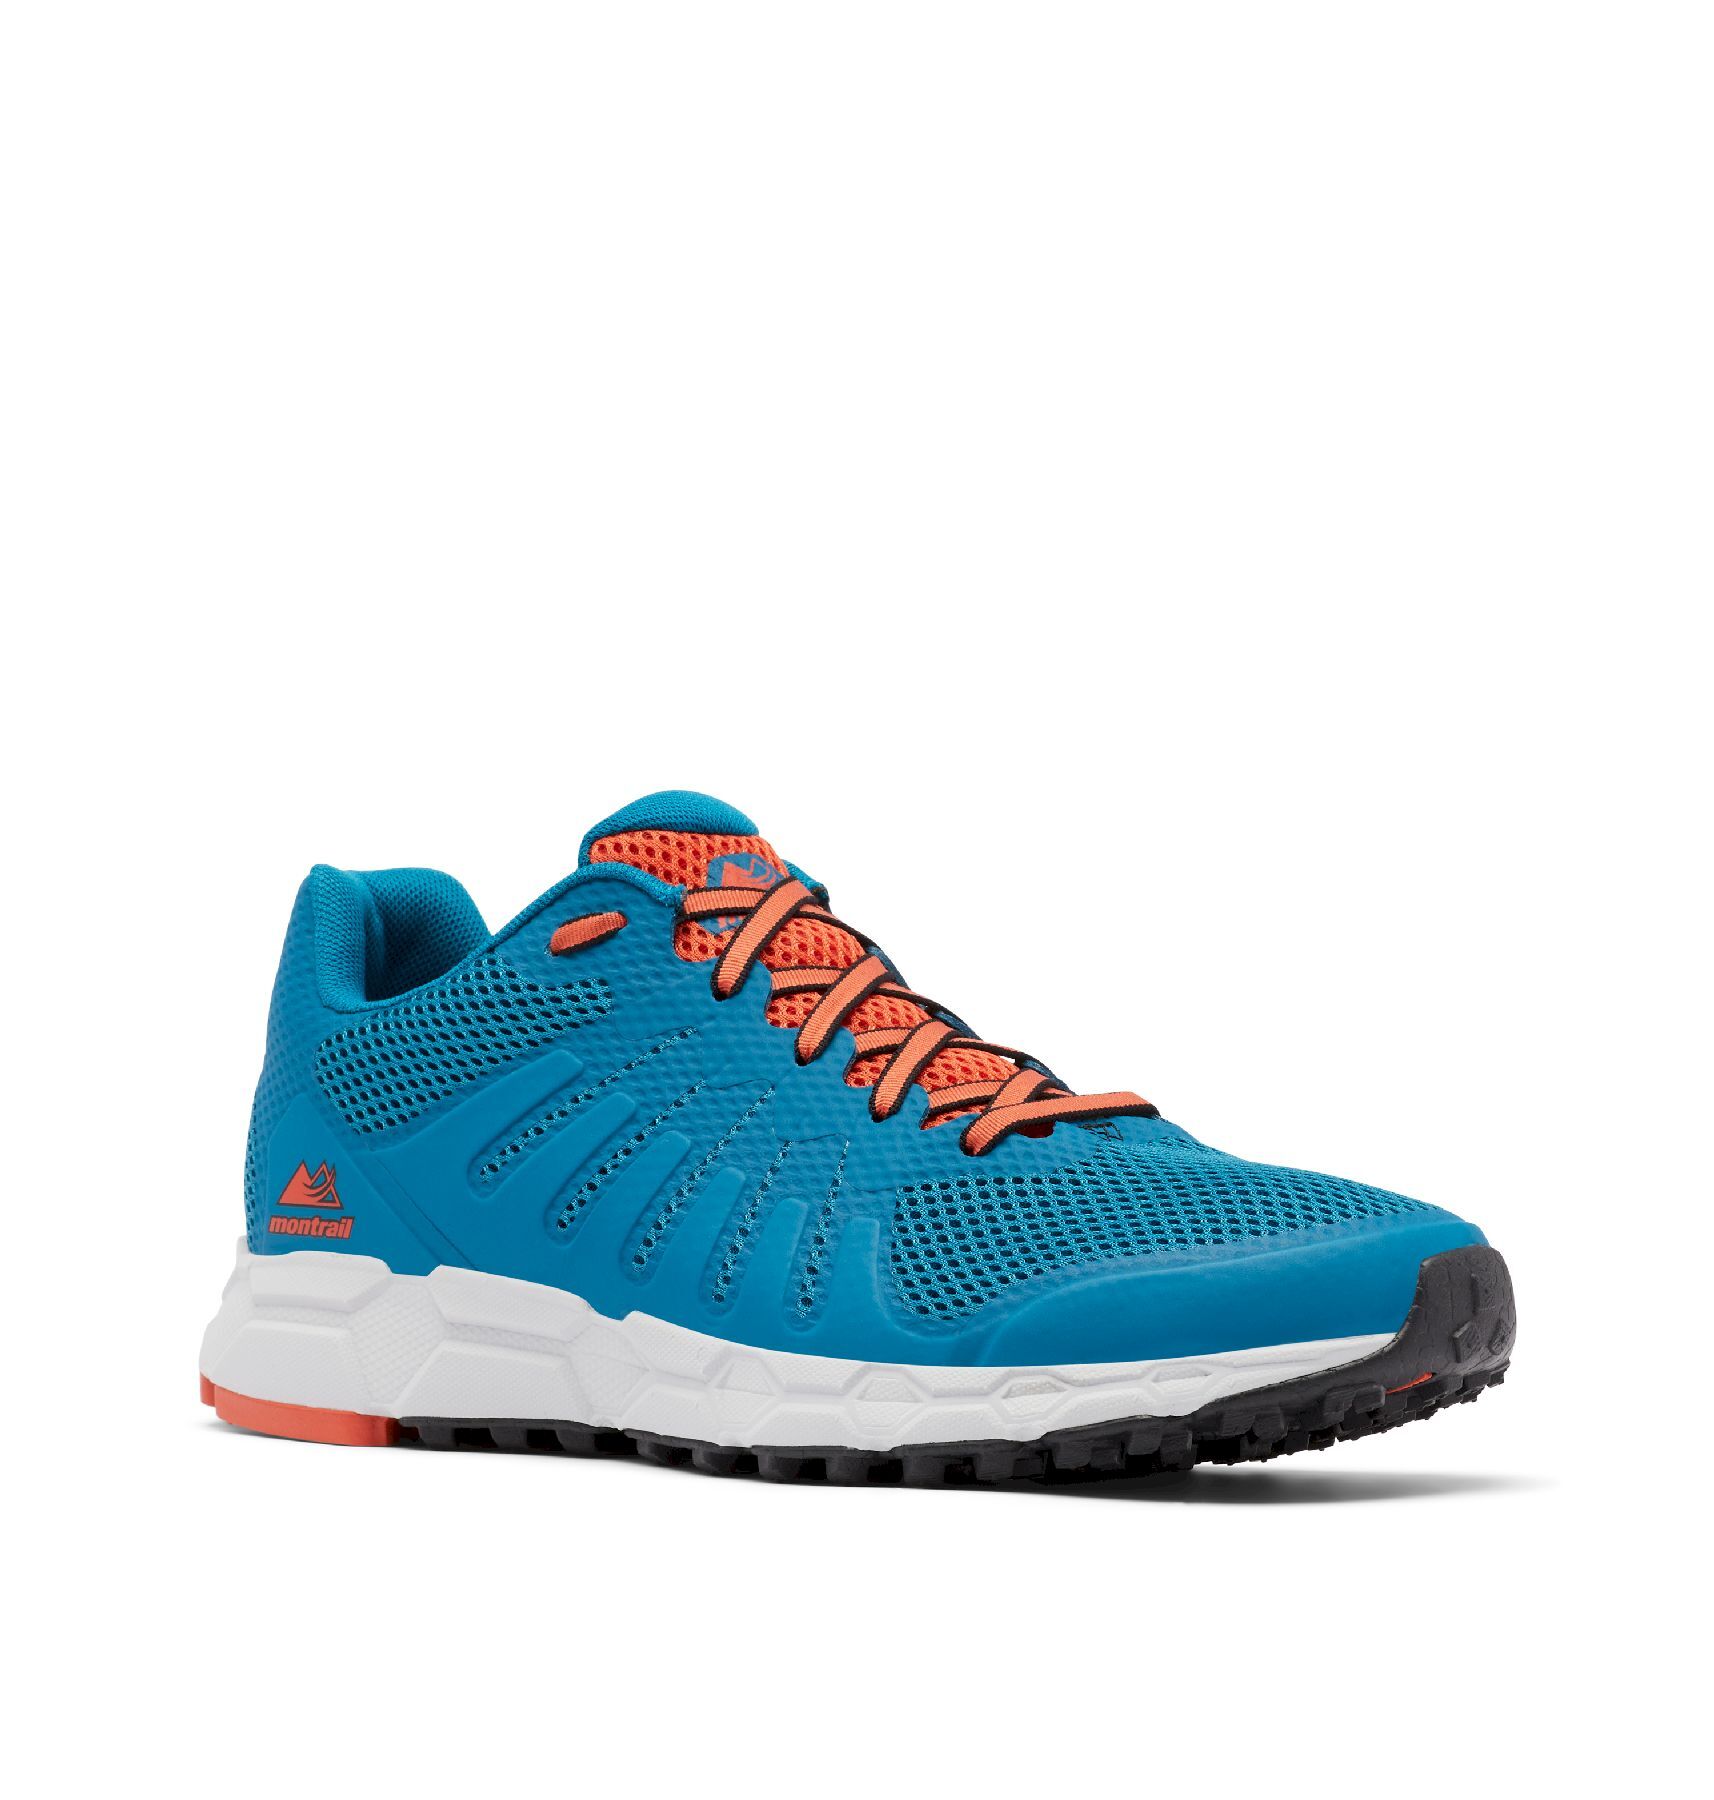 Columbia Columbia Montrail F.K.T. Attempt - Trail running shoes - Men's